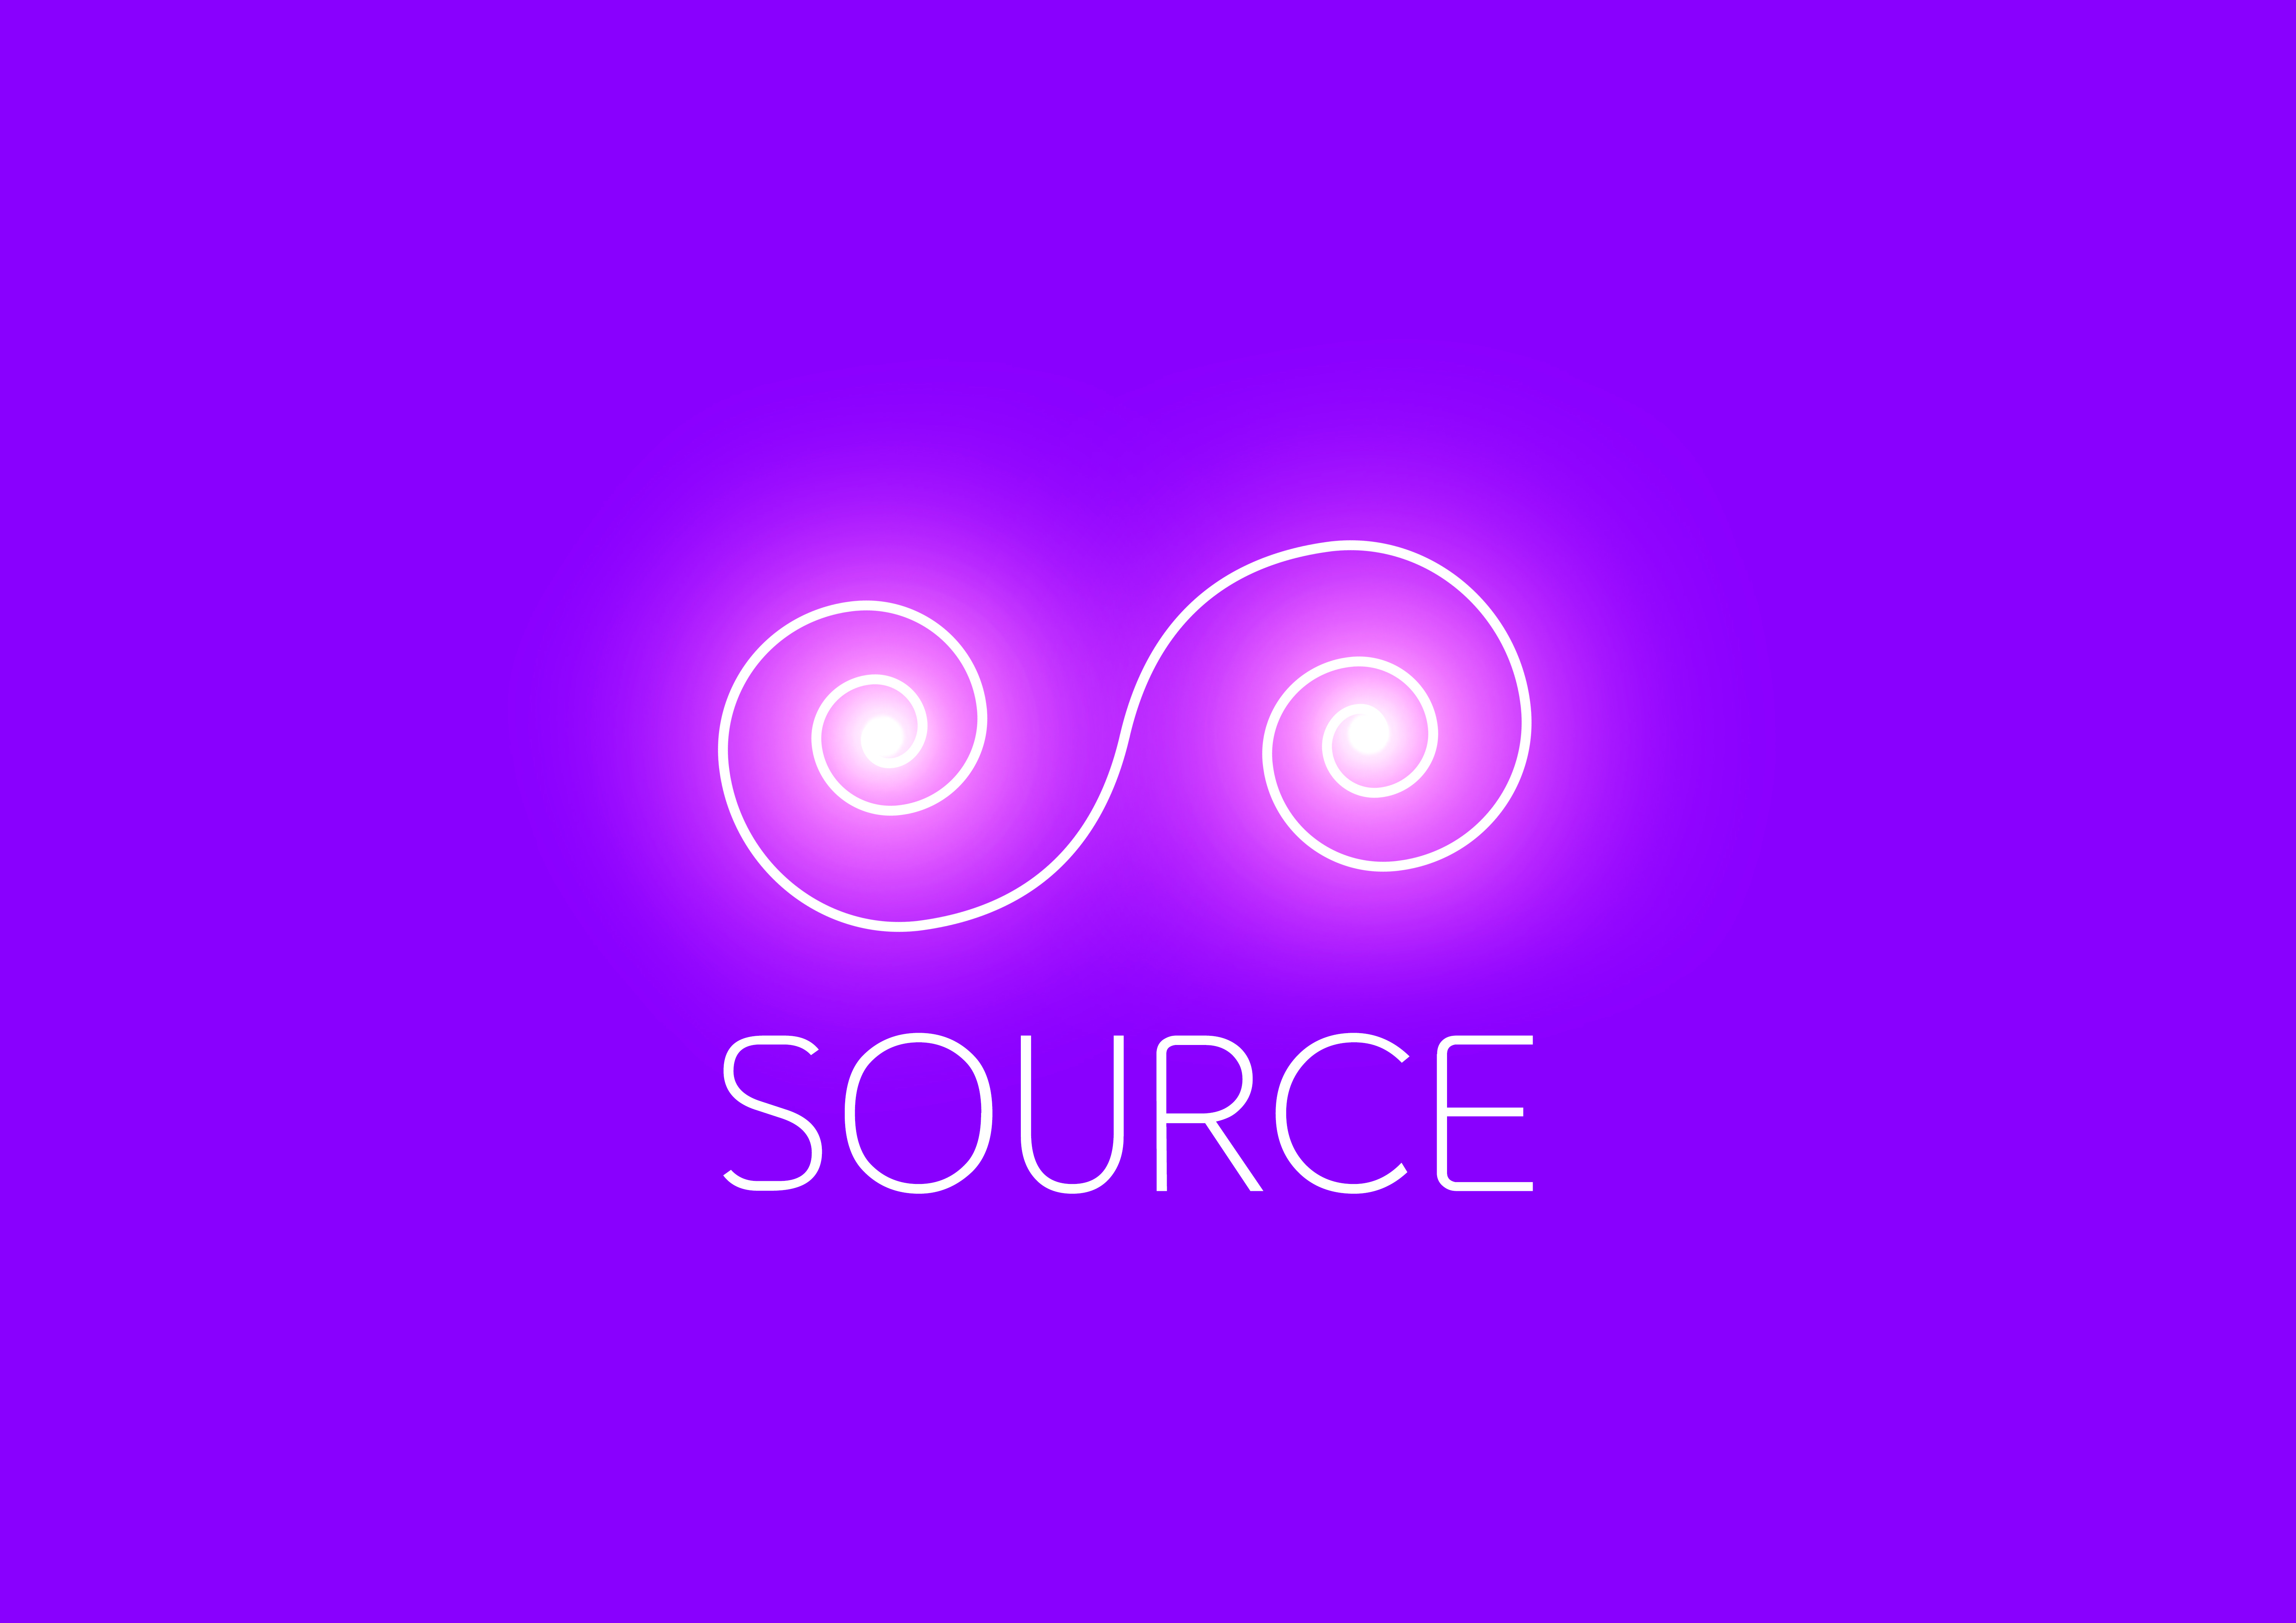 Create Your Online Products via the Source Digital Publishing Platform